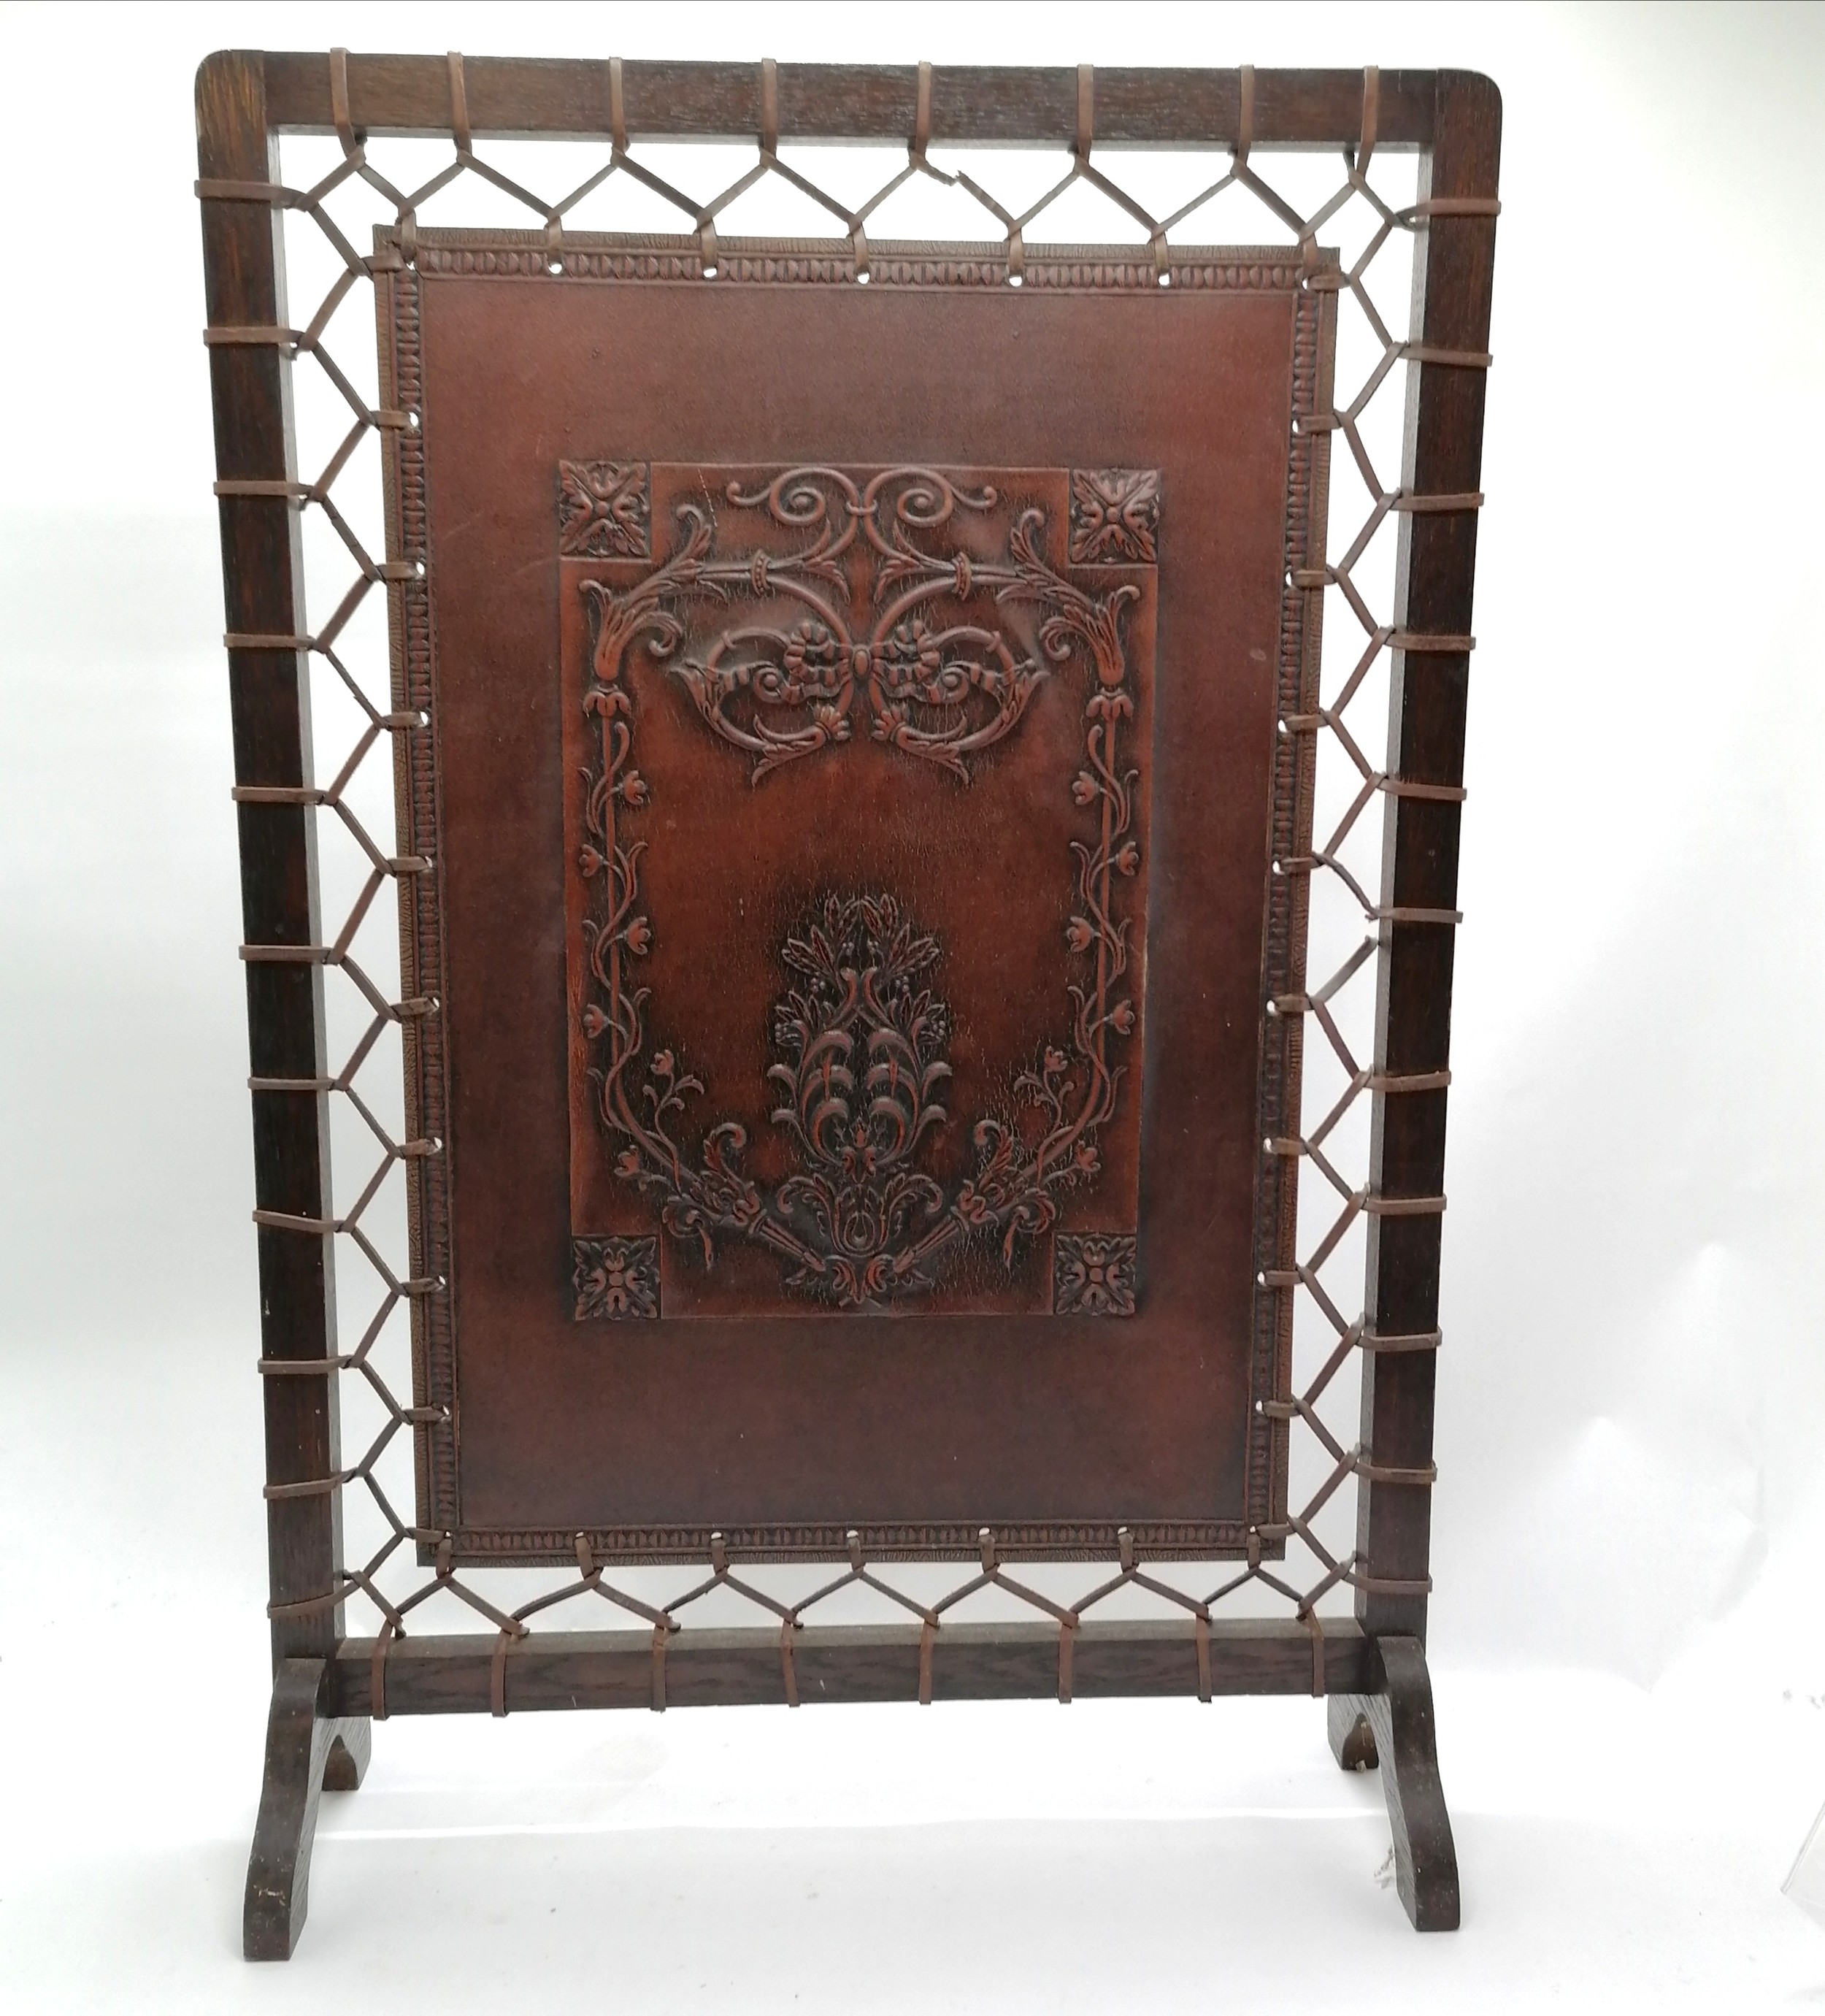 Liberty Arts & Crafts leather tooled fire screen attached to a wooden frame with leather stringing